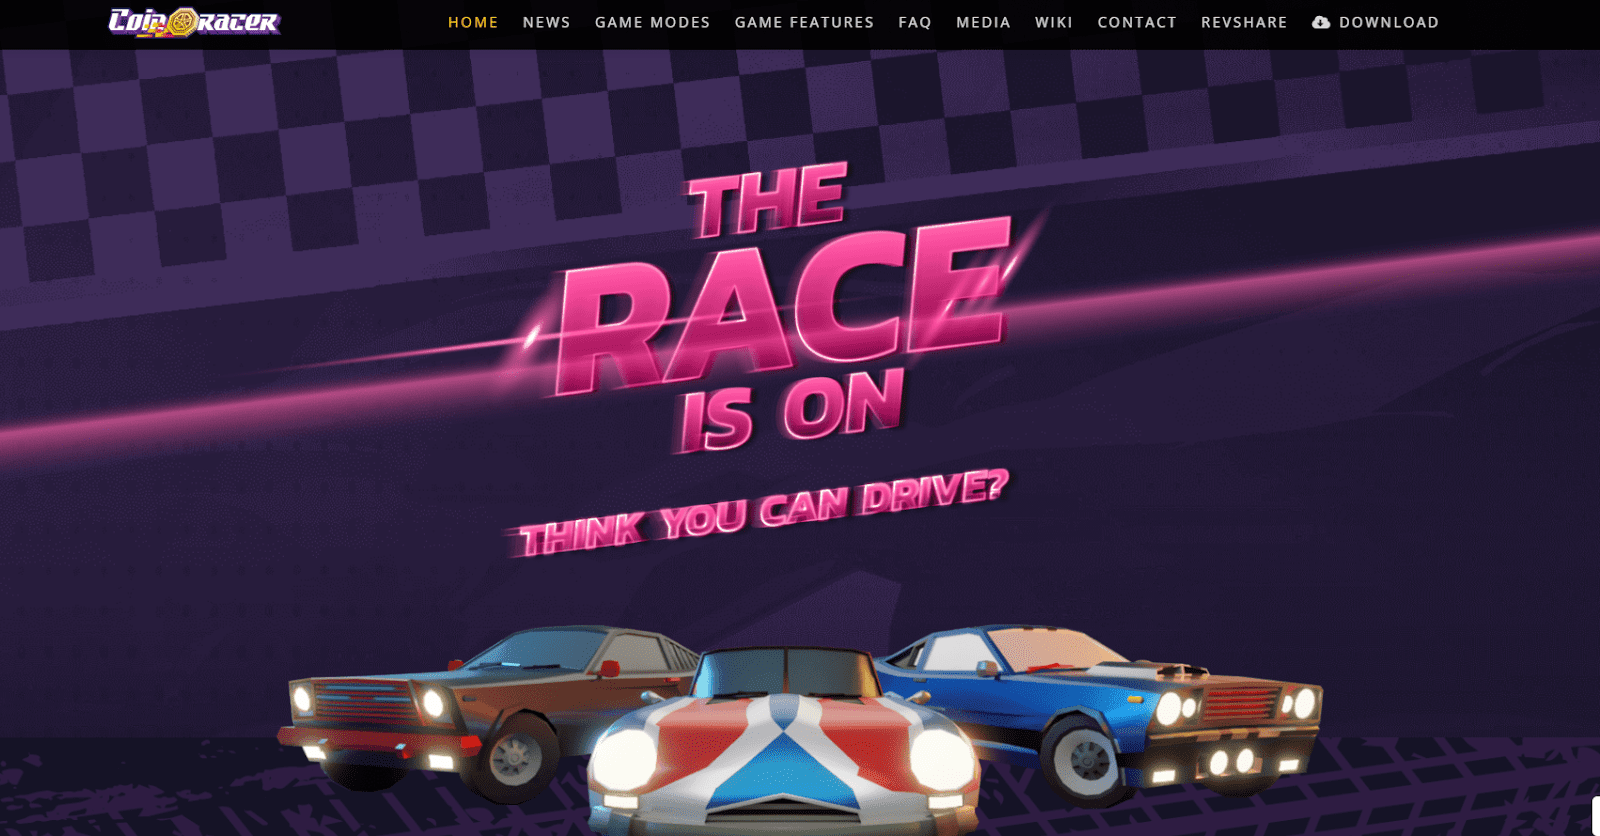 coinracer